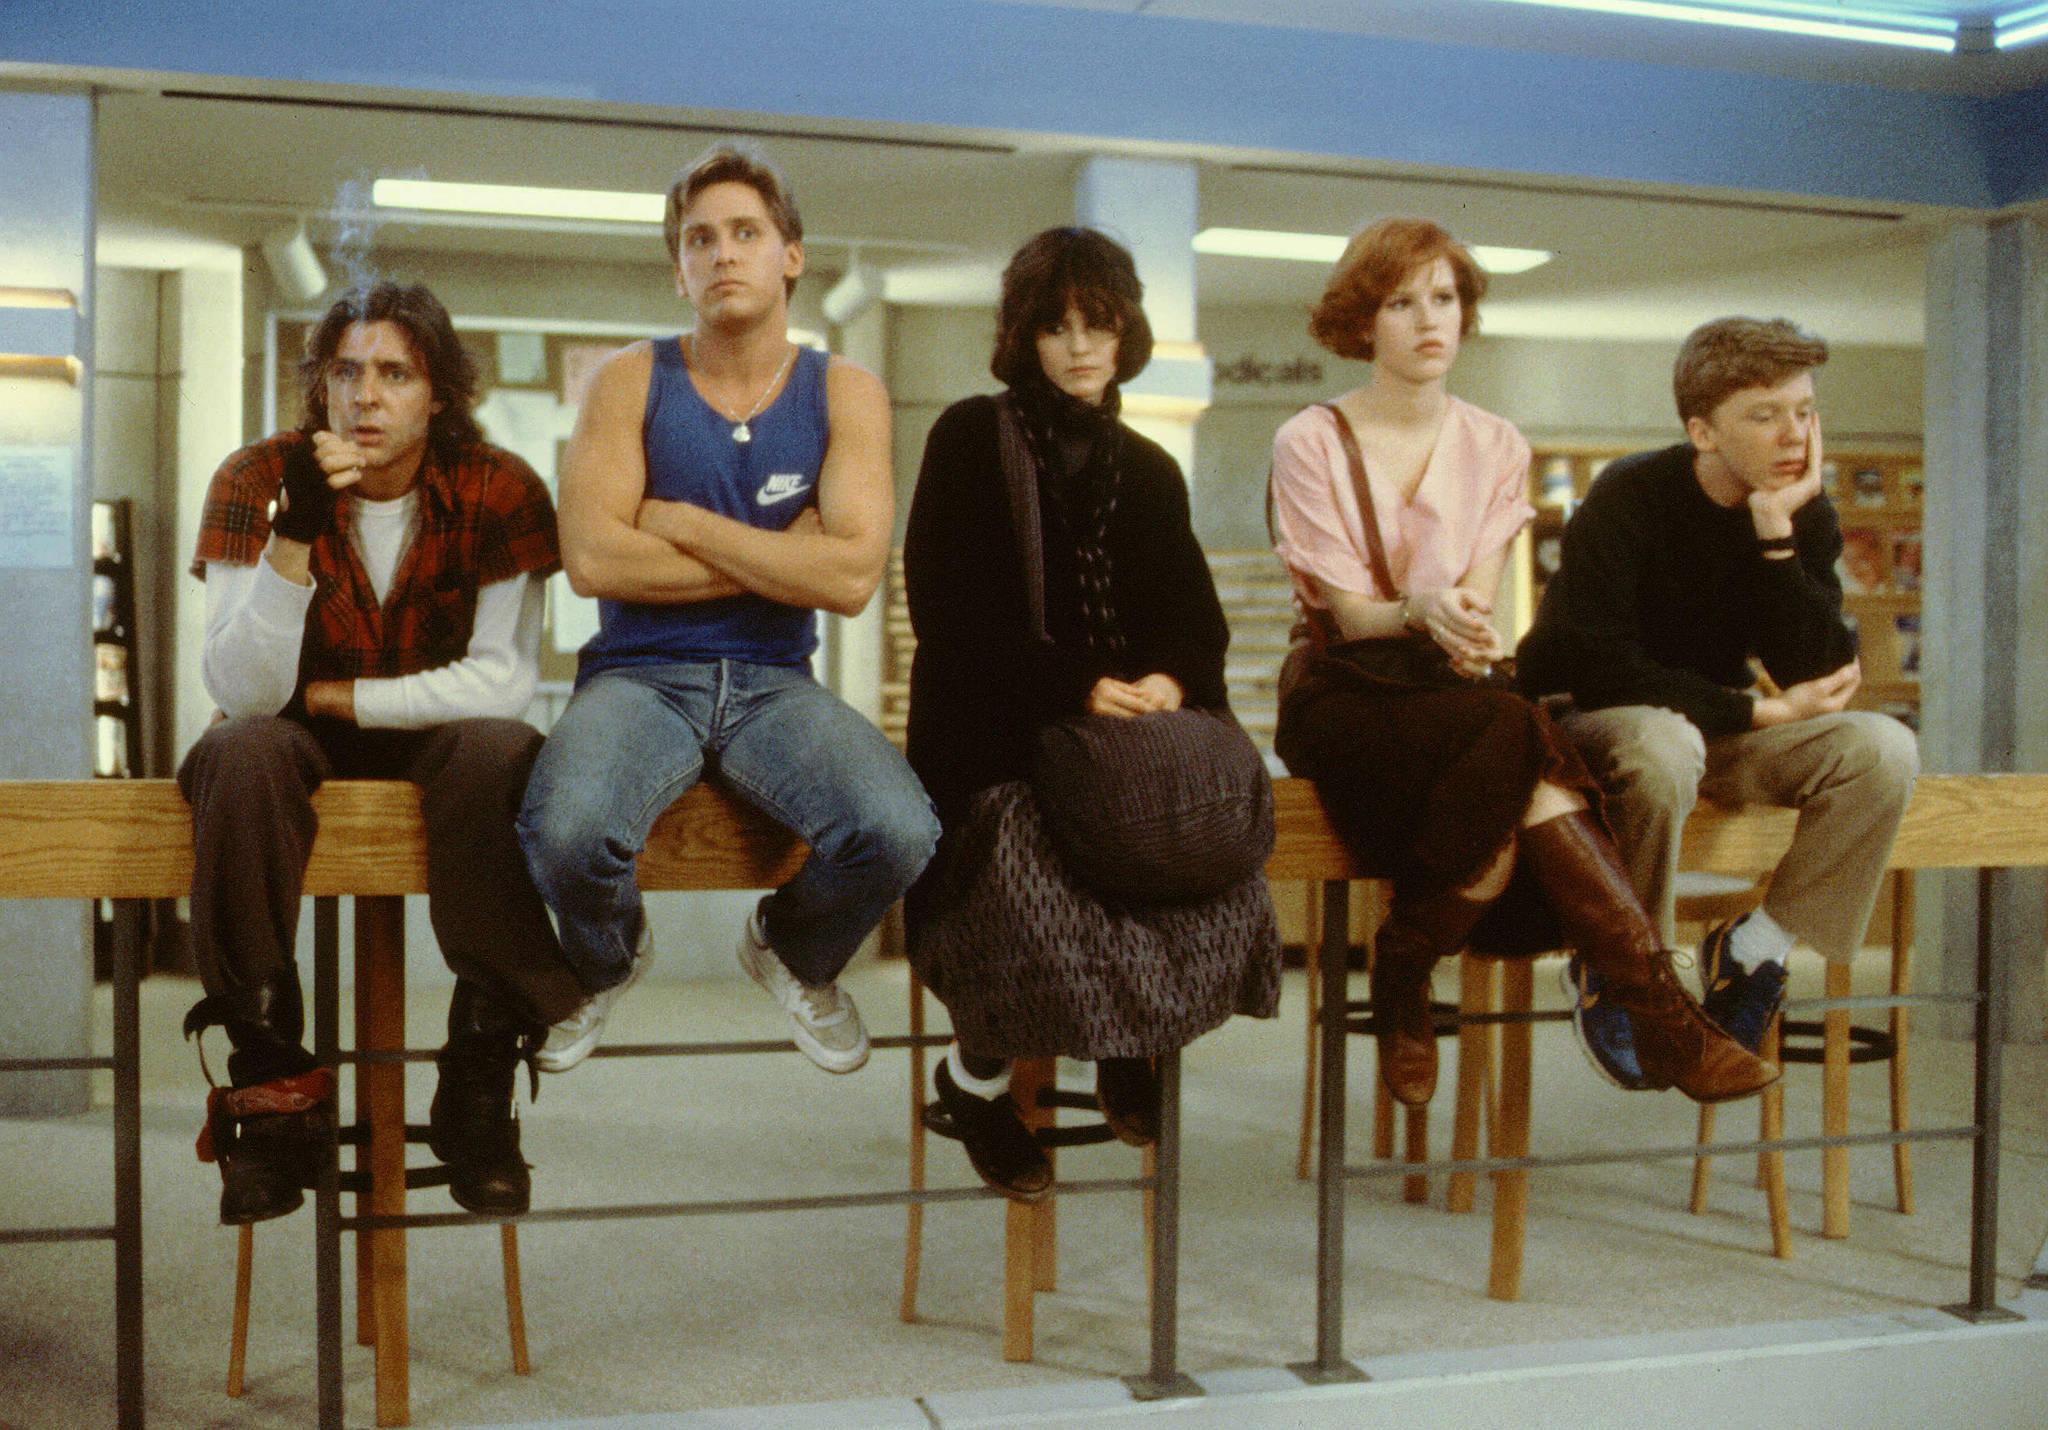 molly-ringwald_-emilio-estevez_-judd-nelson_-ally-sheedy_-and-anthony-michael-hall-in-the-breakfast-club-_1985_-large-picture.jpg